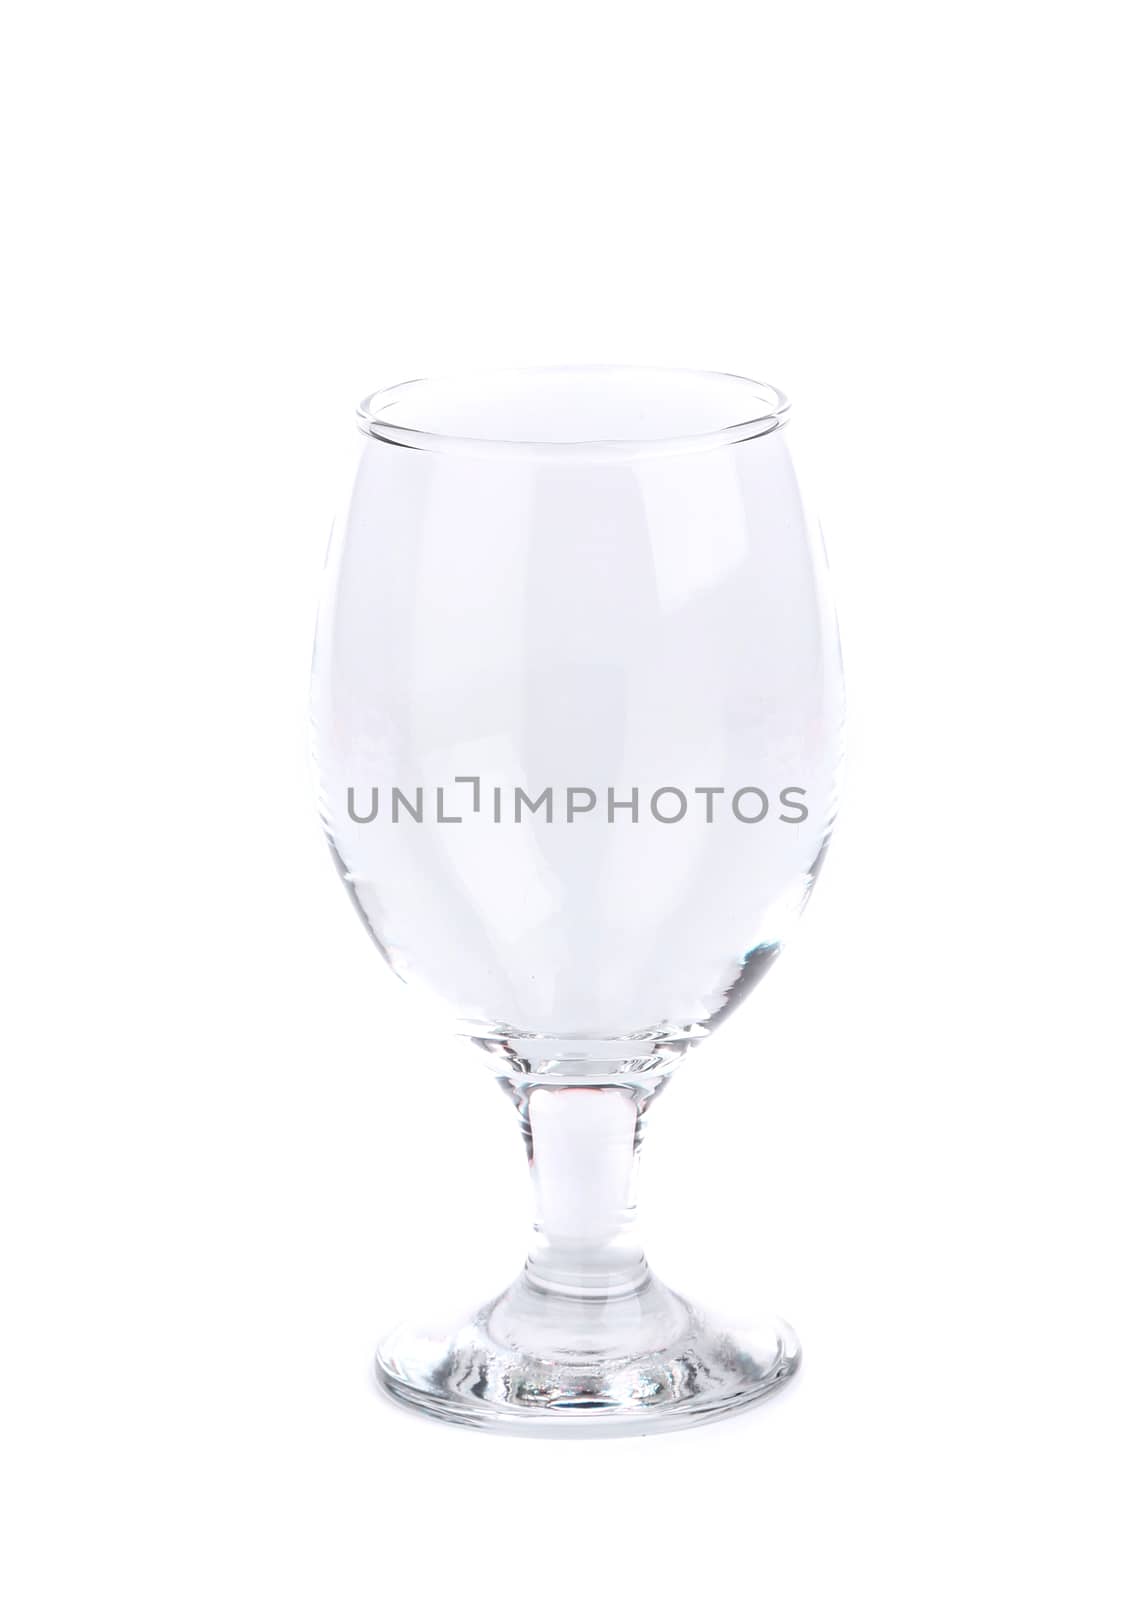 Empty wine glass isolated on a white background.